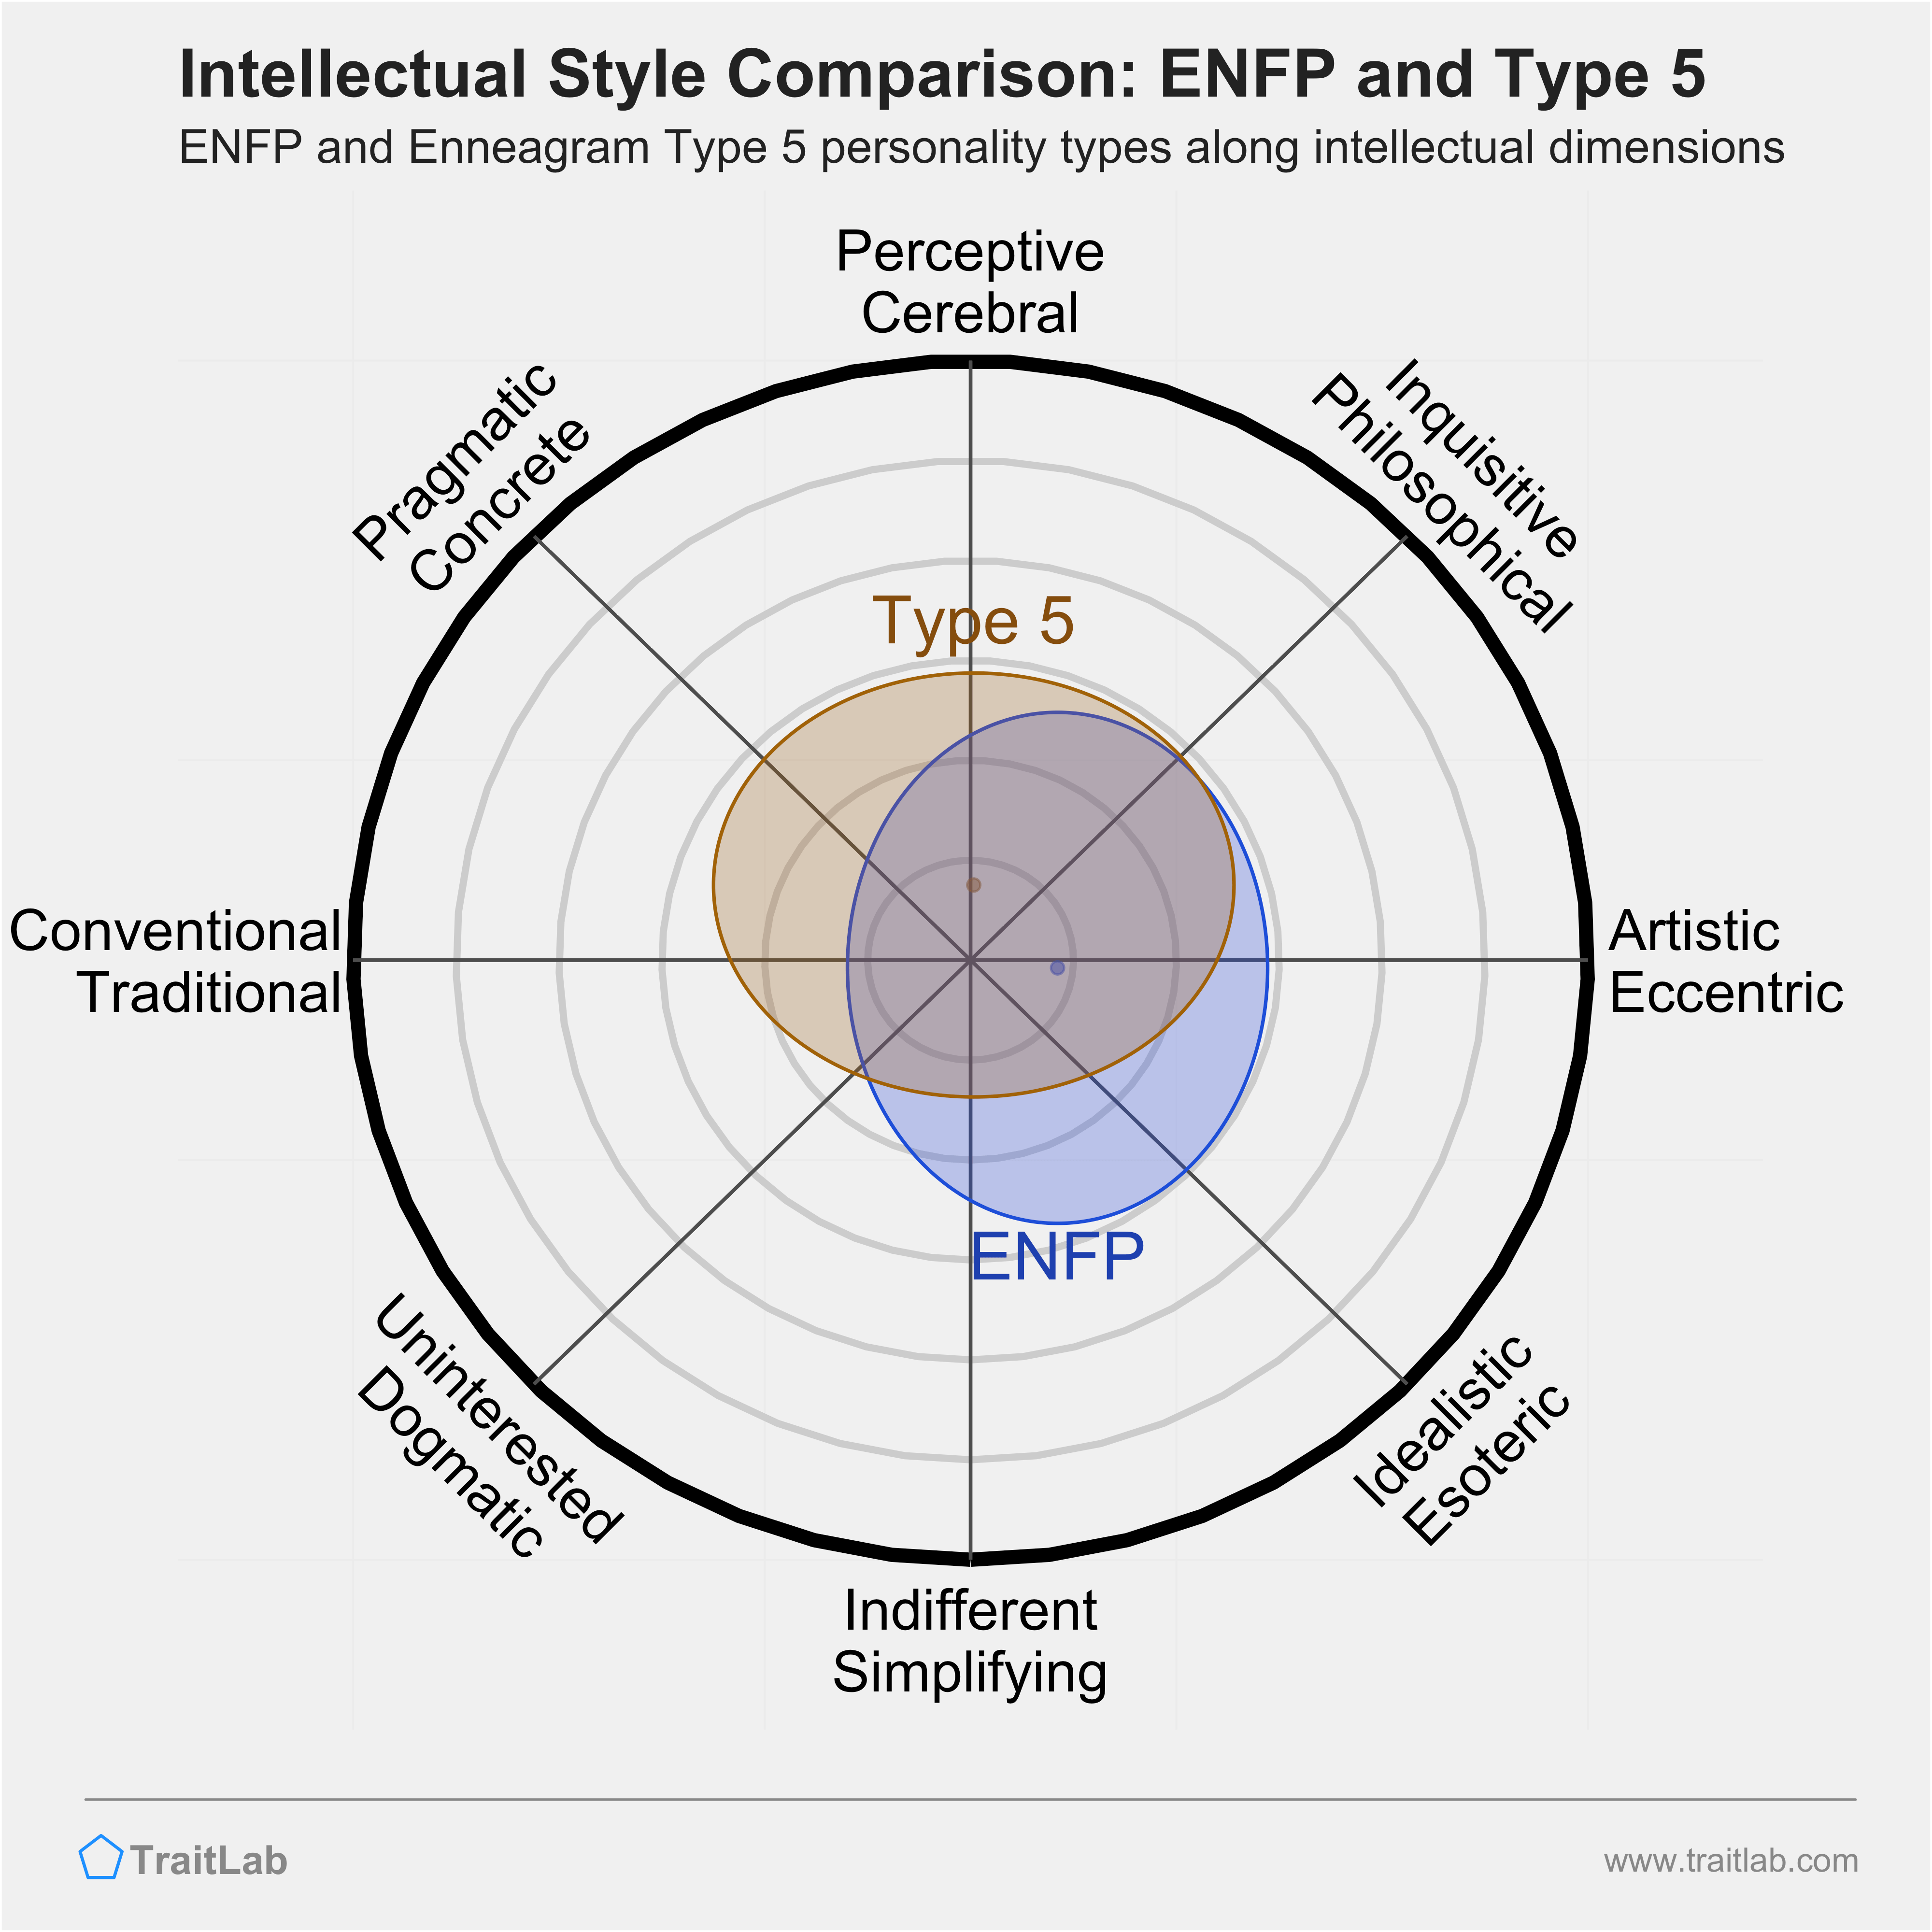 ENFP and Type 5 comparison across intellectual dimensions